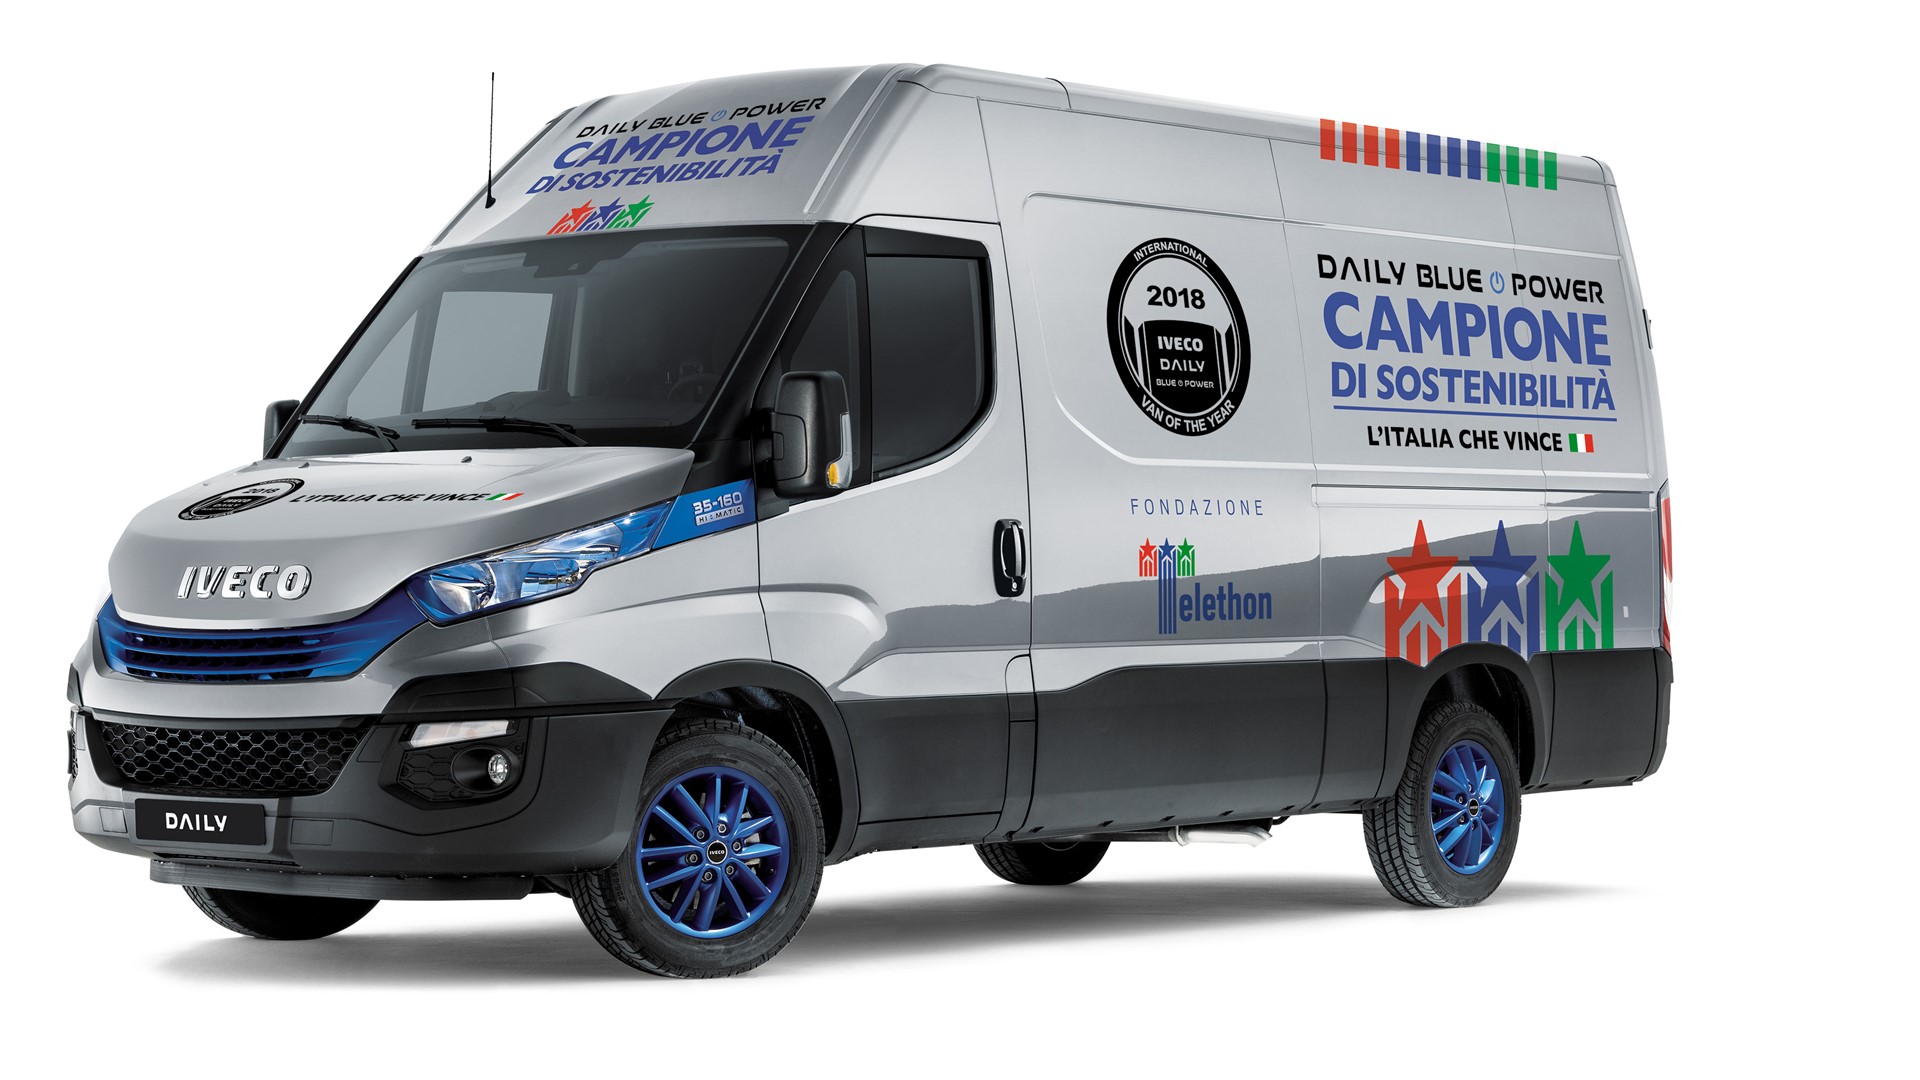 IVECO's new Daily Blue Power Hi-Matic Natural Power in a special Telethon and “l’Italia che vince” livery